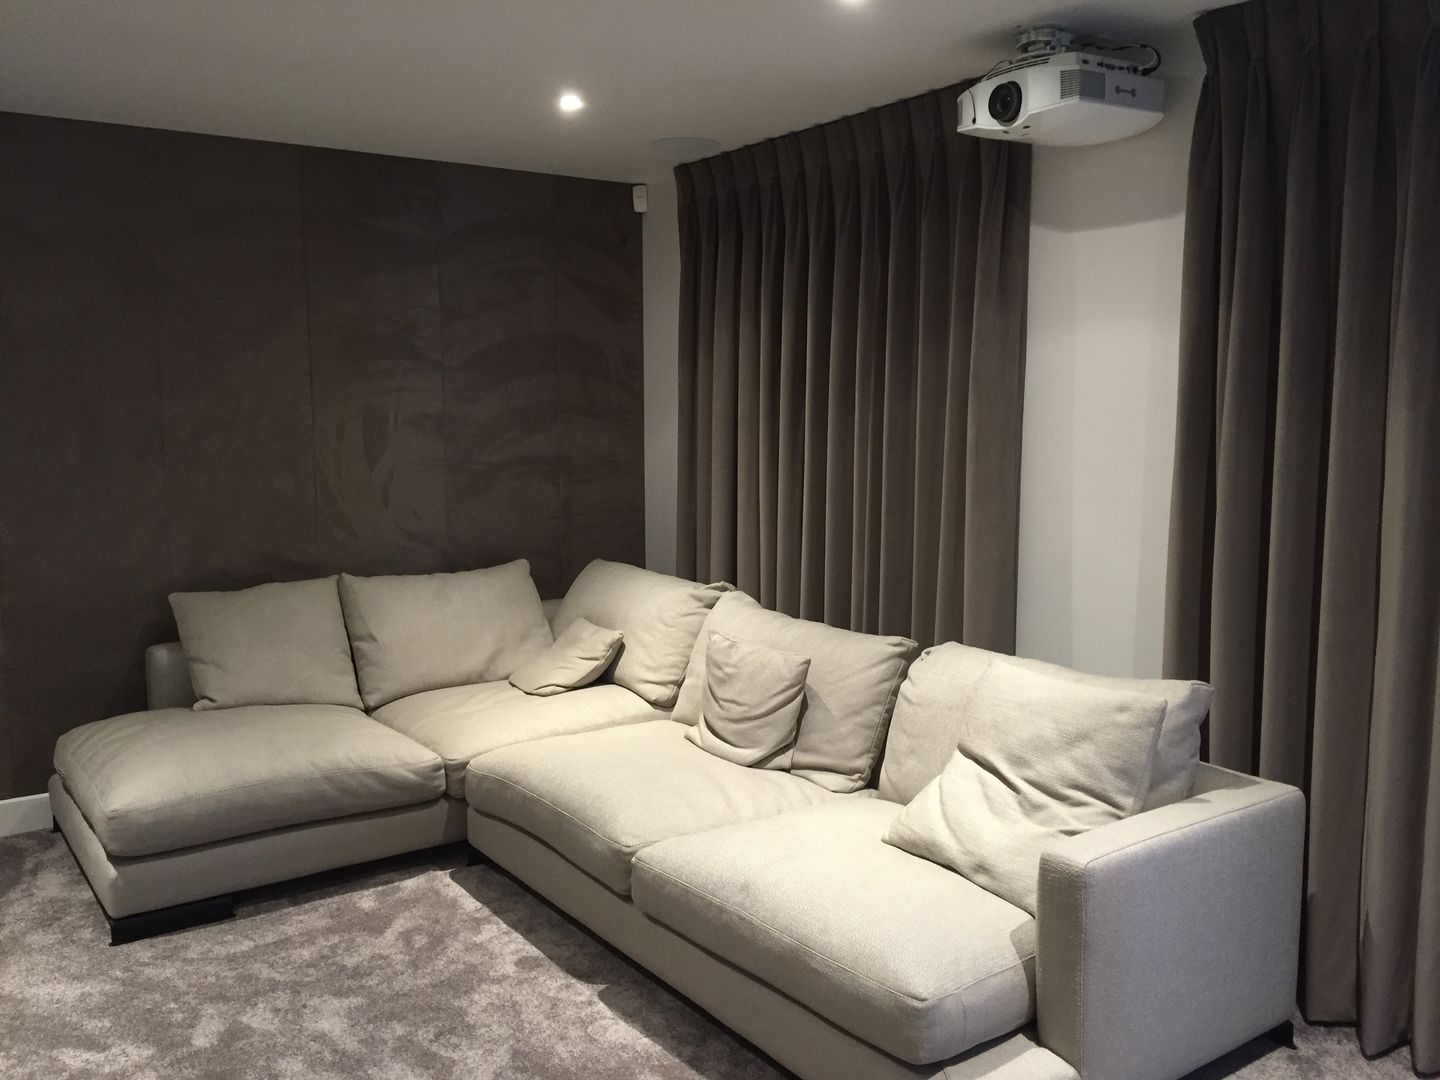 Cinema Room with bespoke suede fabric walls, Designer Vision and Sound Designer Vision and Sound 視聽室